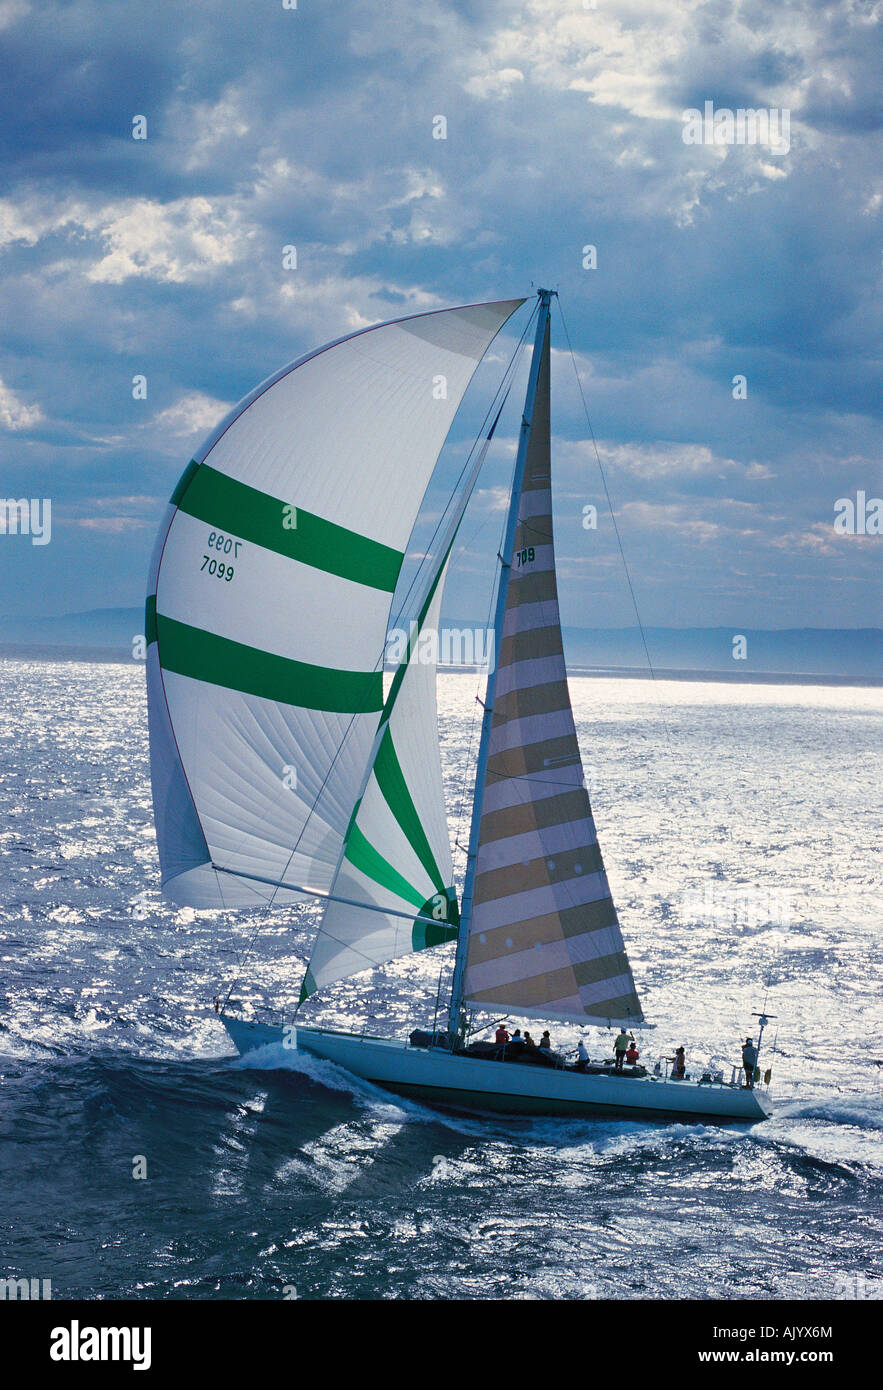 Australia.  New South Wales coast. Side view of ocean going yacht with spinnaker sail during race. Stock Photo